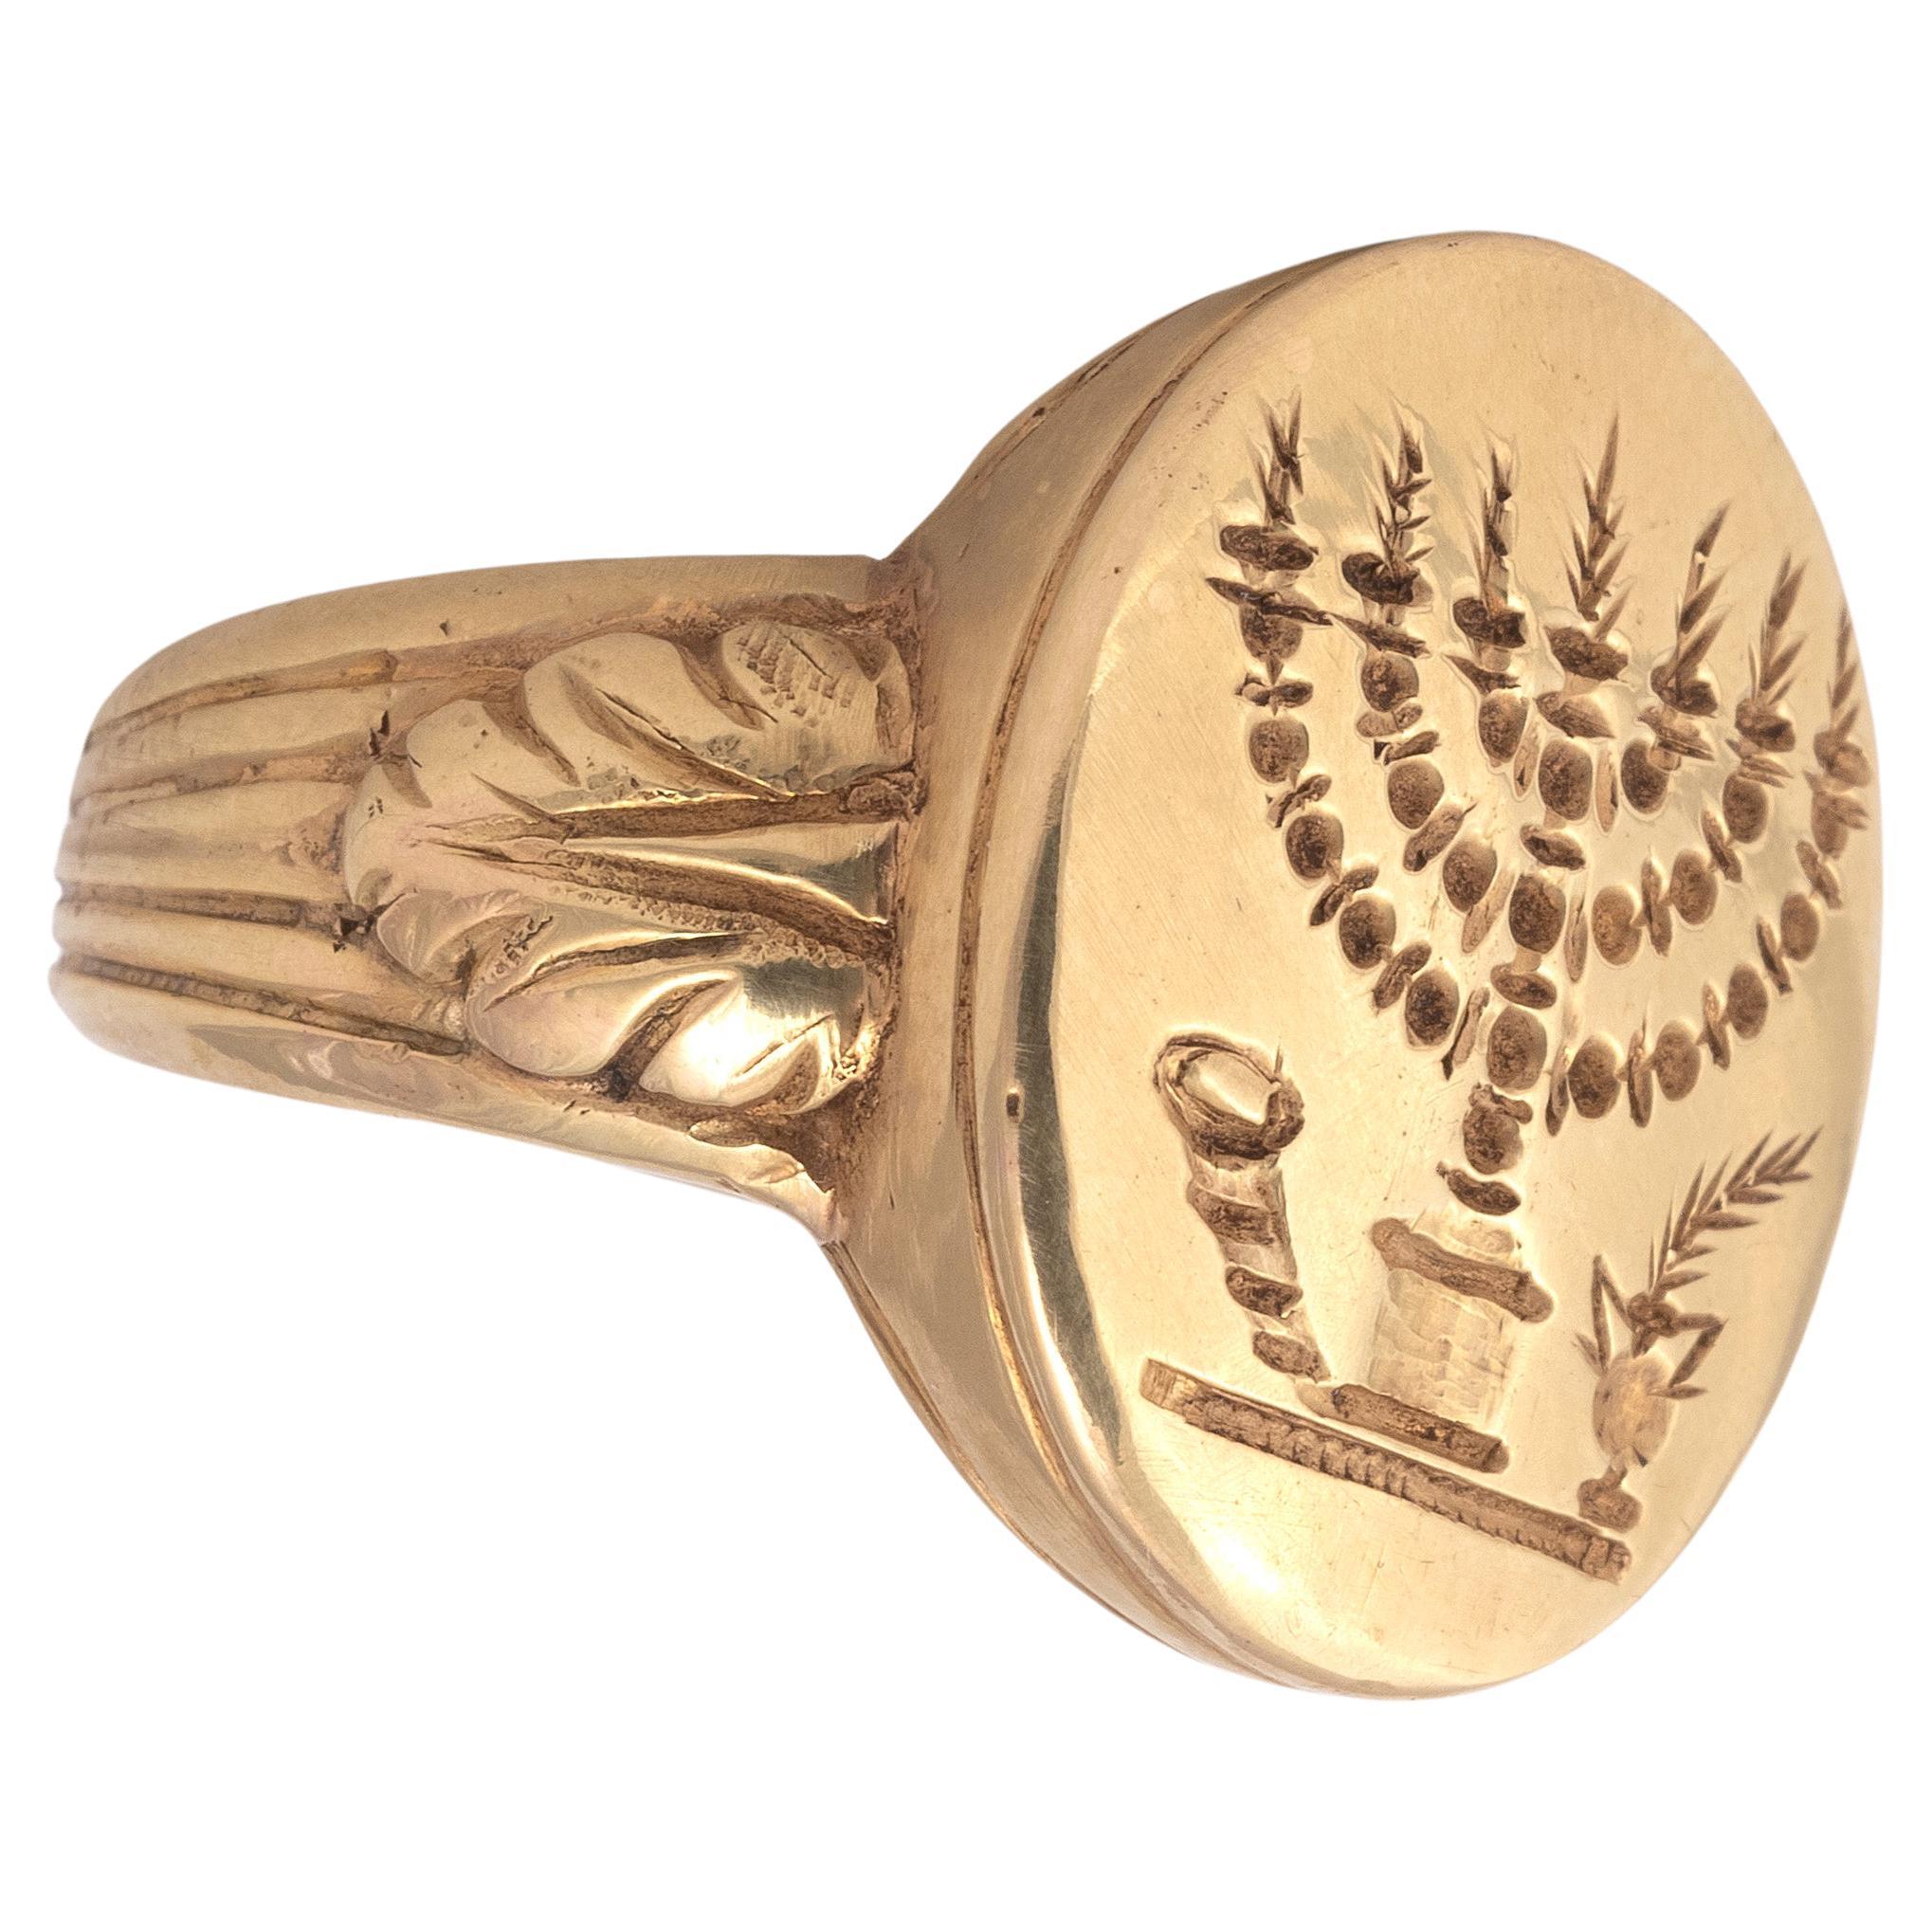 Antique signet jewish ring depicting a large candelabra or Menorah which has lit candles or tapers.Flanking the candlestick are a ram's horn or shofar and a vase with a palm frond, both symbols frequently encountered on representations of the